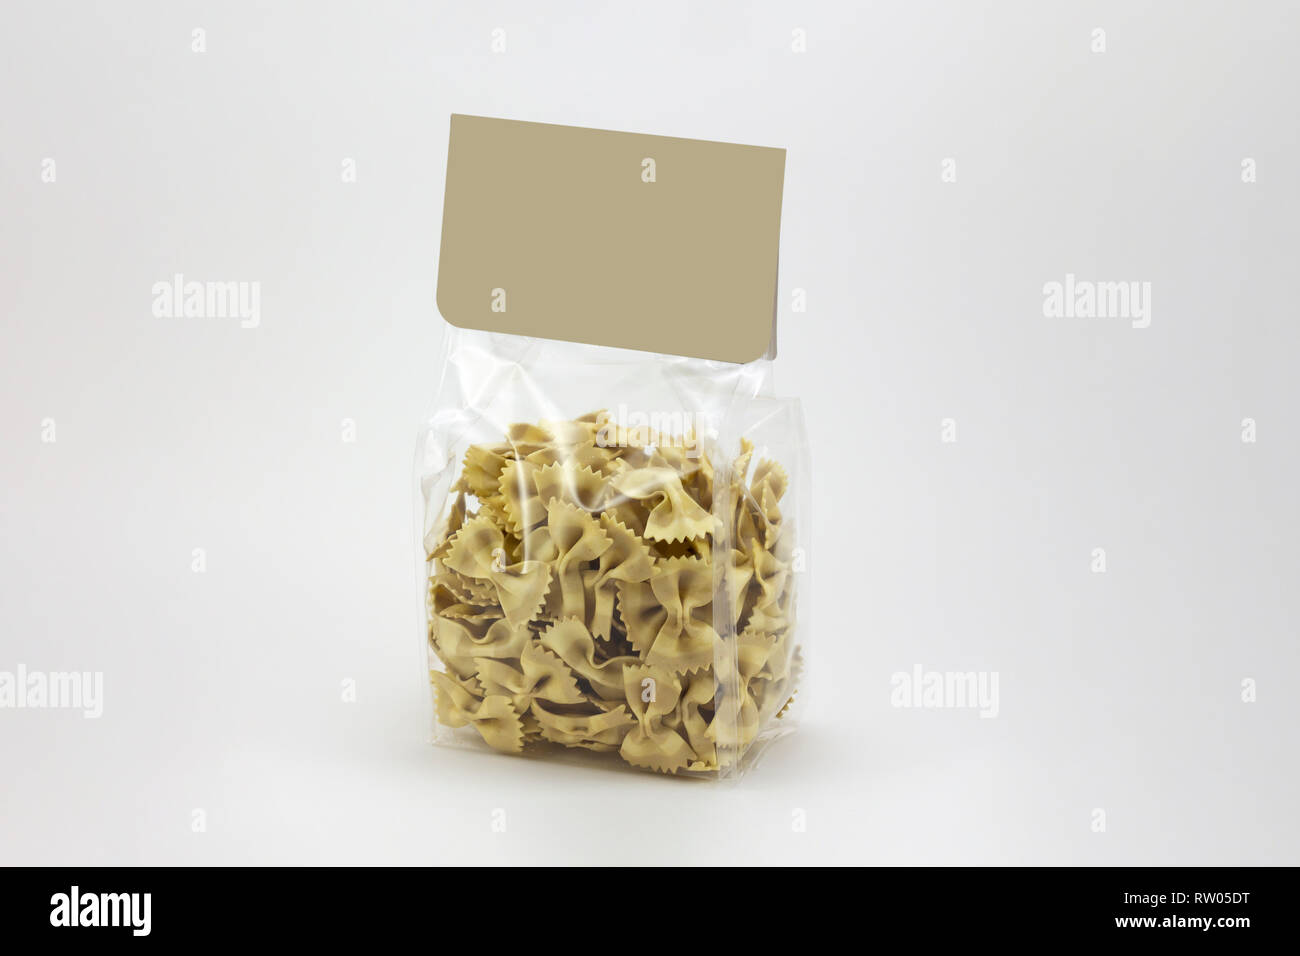 Pasta In Plastic Packaging High Resolution Stock Photography And Images Alamy